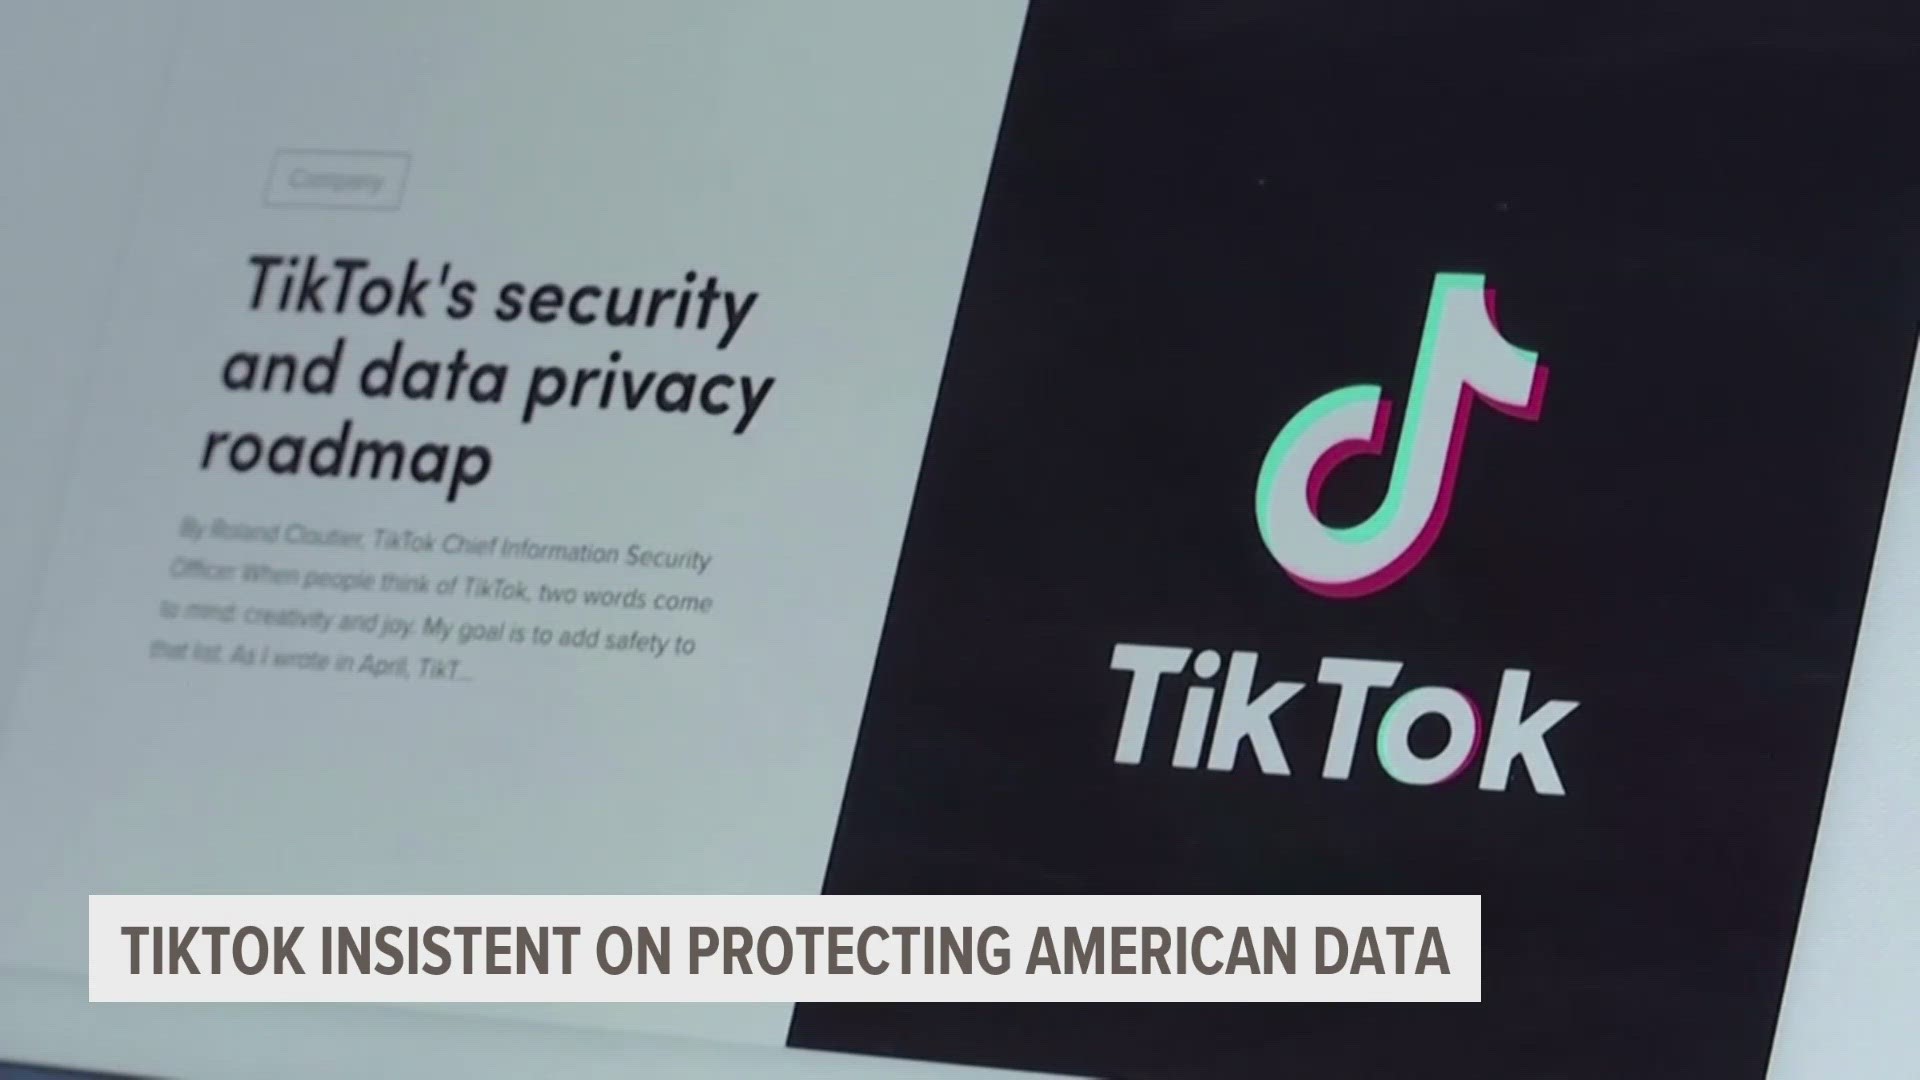 The CEO of TikTok made a rare public appearance to counter the volley of accusations that the hugely popular video-sharing app has been facing.